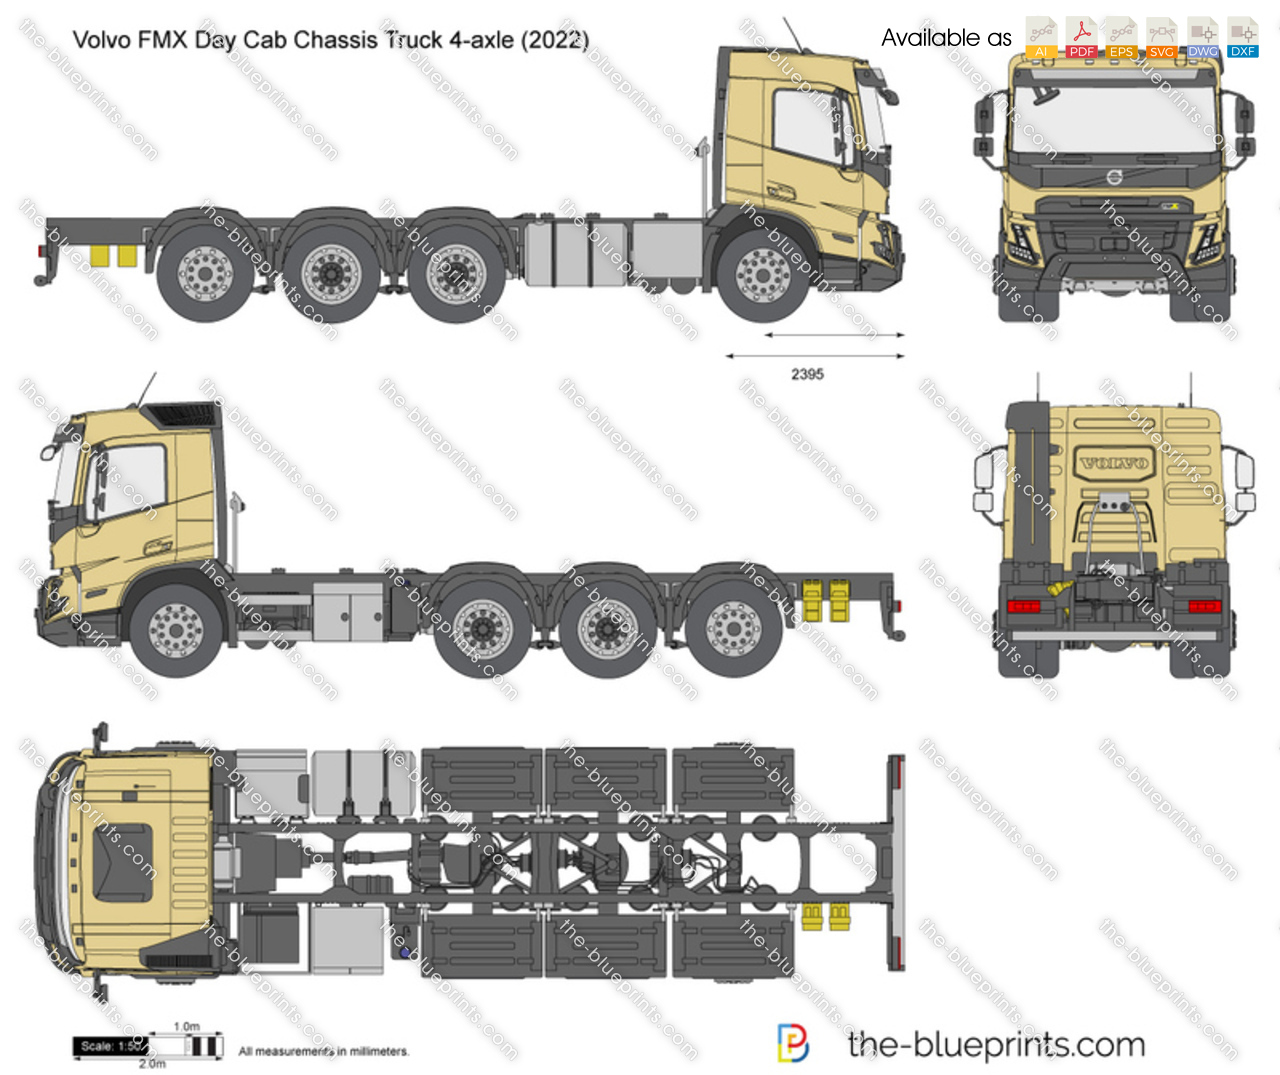 Volvo FMX Day Cab Chassis Truck 4-axle